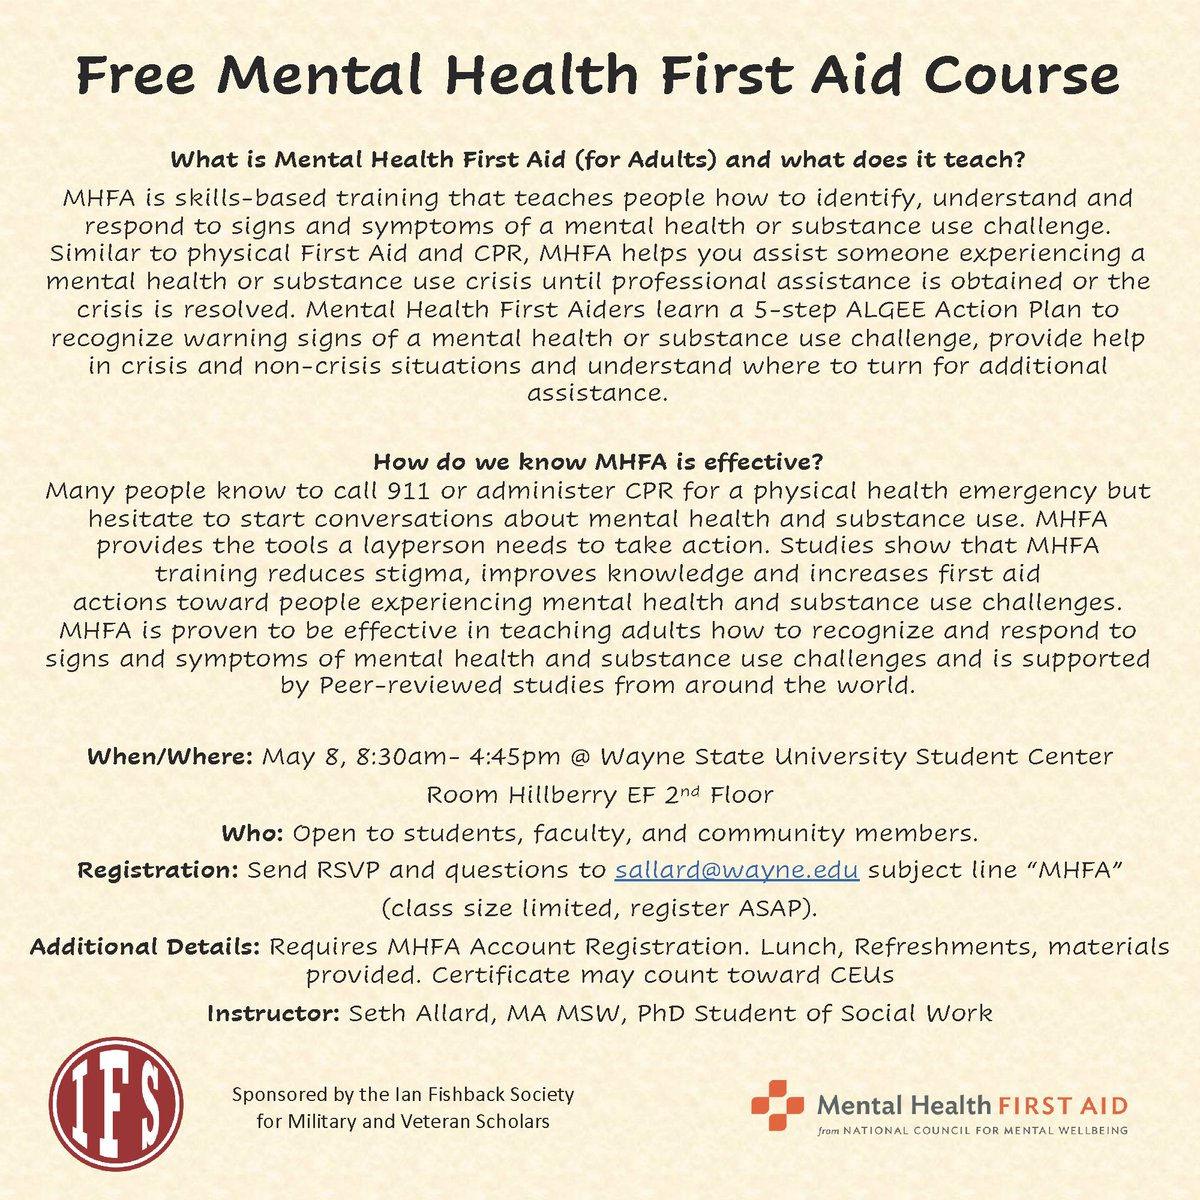 Many people know to call 911 or administer CPR for a physical health emergency but
hesitate to start conversations about mental health and substance use. MHFA
provides the tools a layperson needs to take action. Space is limited for this FREE training. bit.ly/4d9VubZ